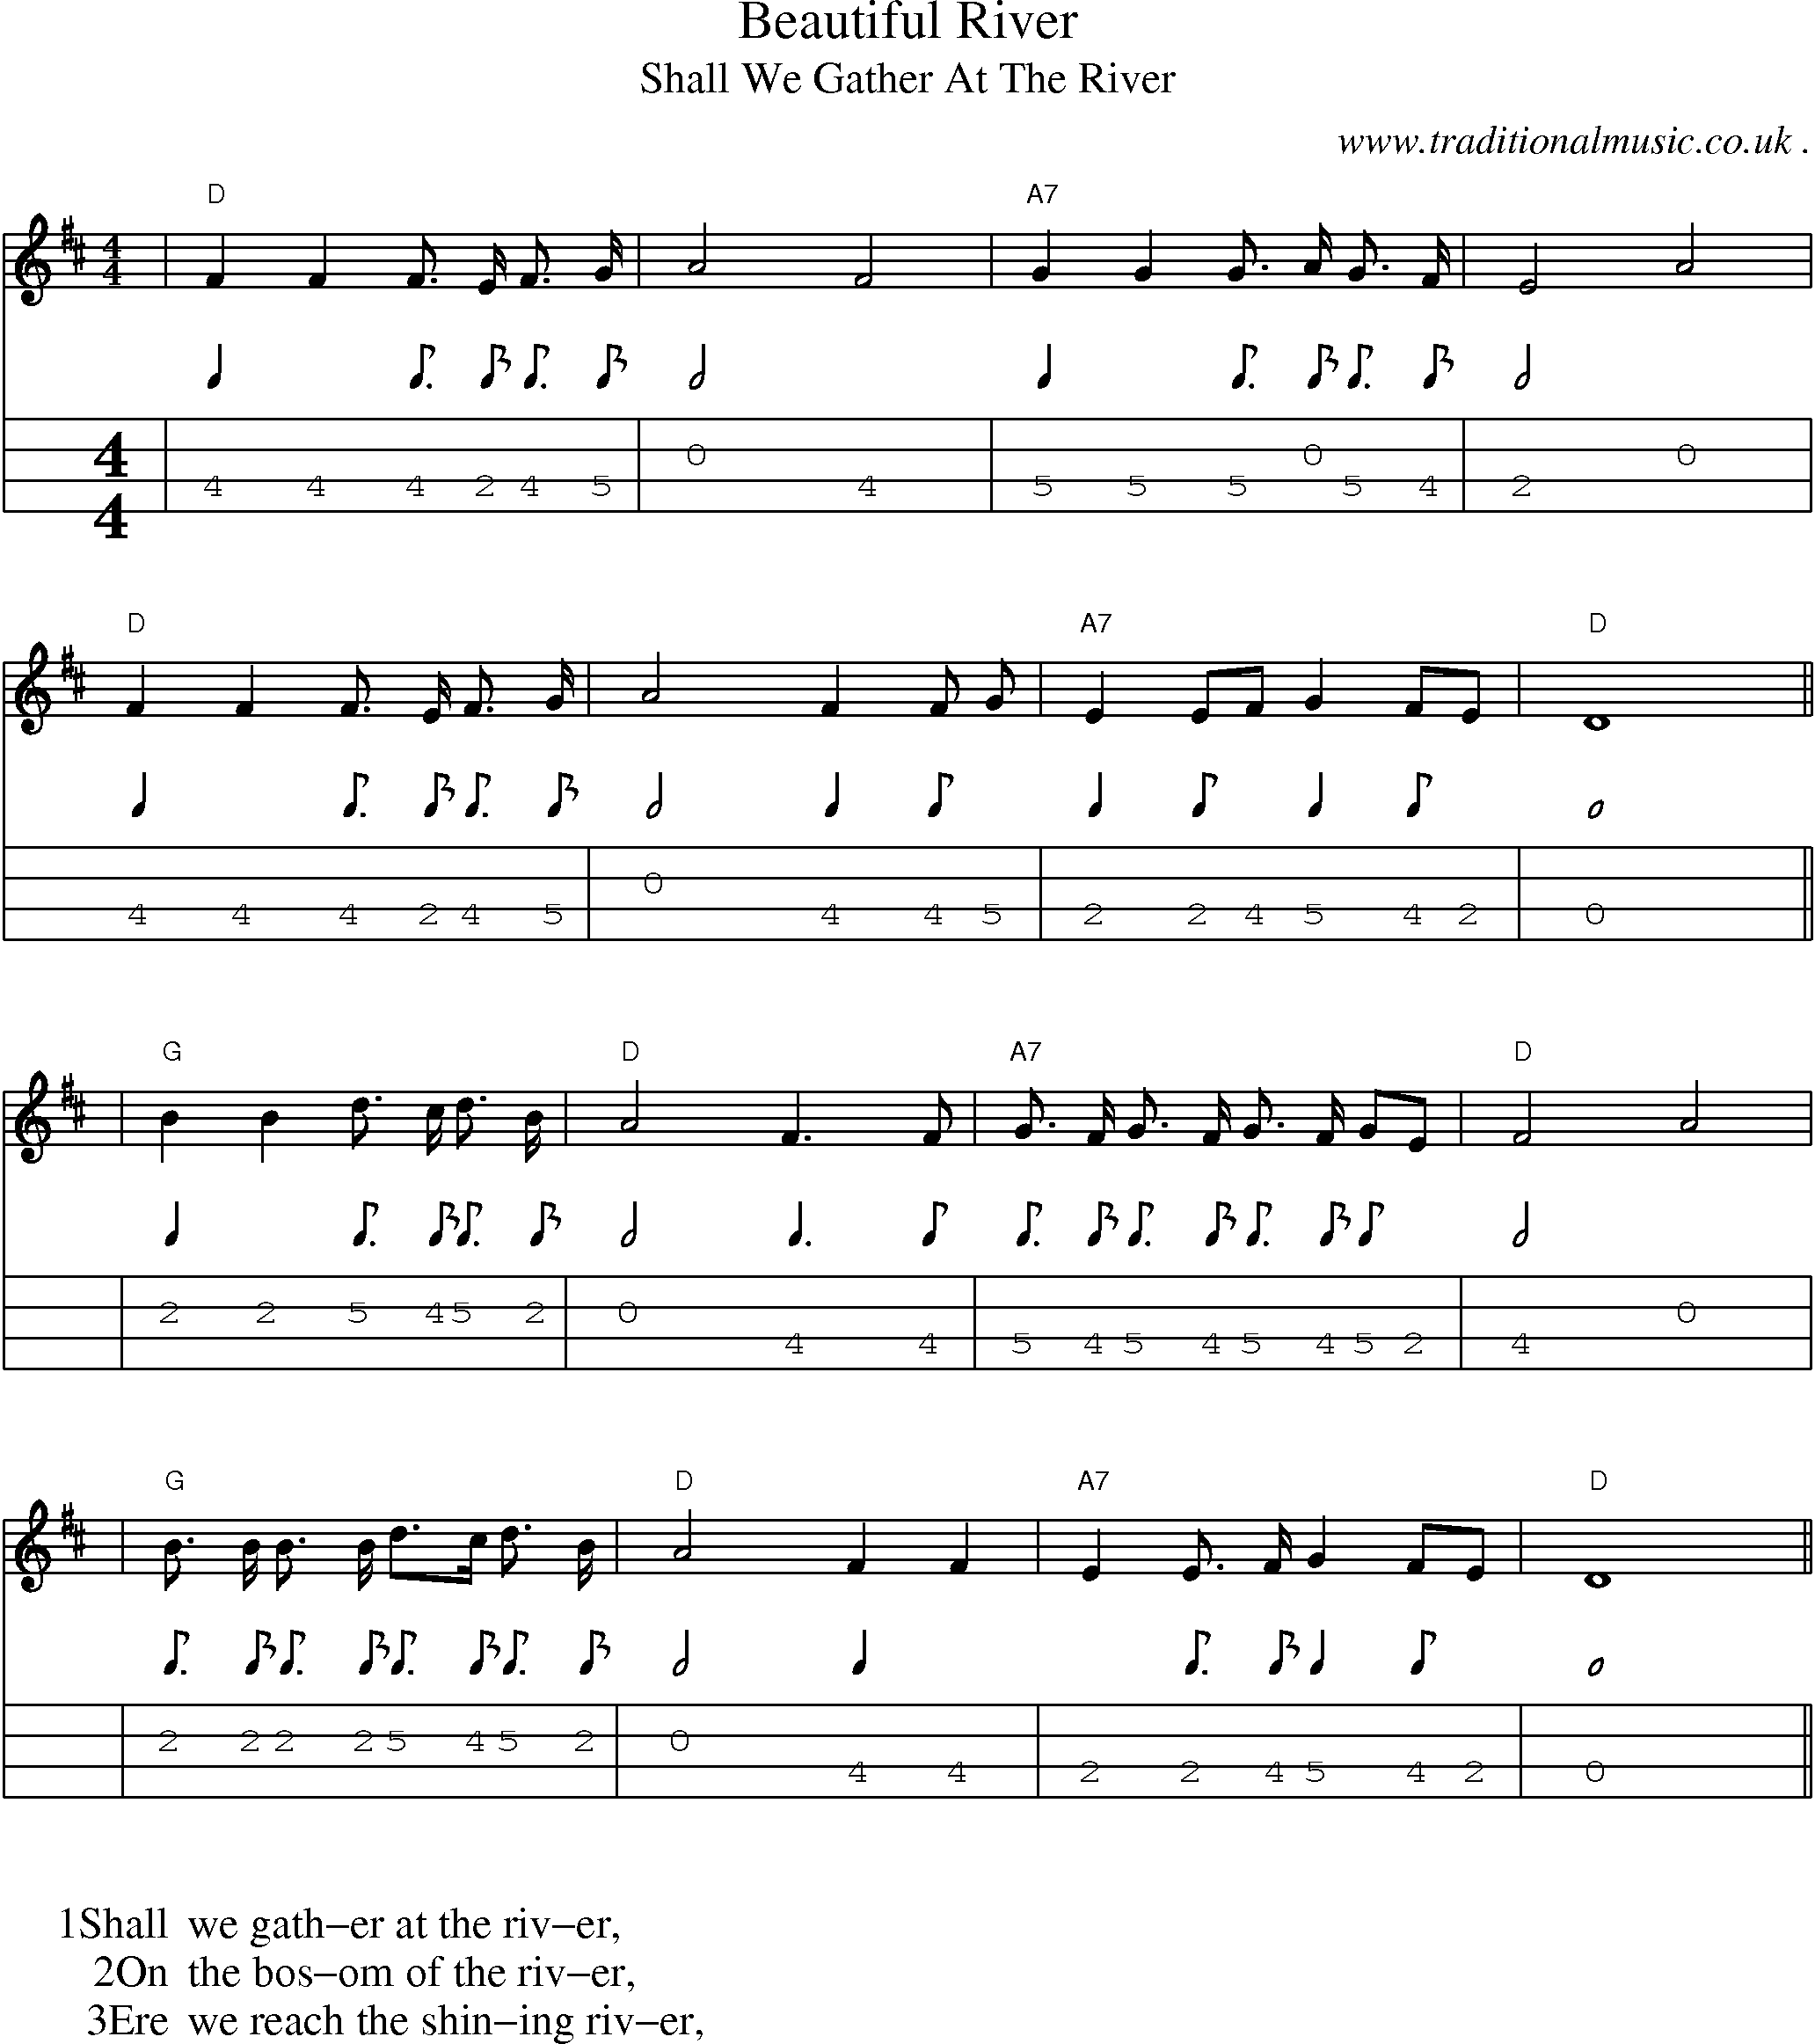 Music Score and Mandolin Tabs for Beautiful River